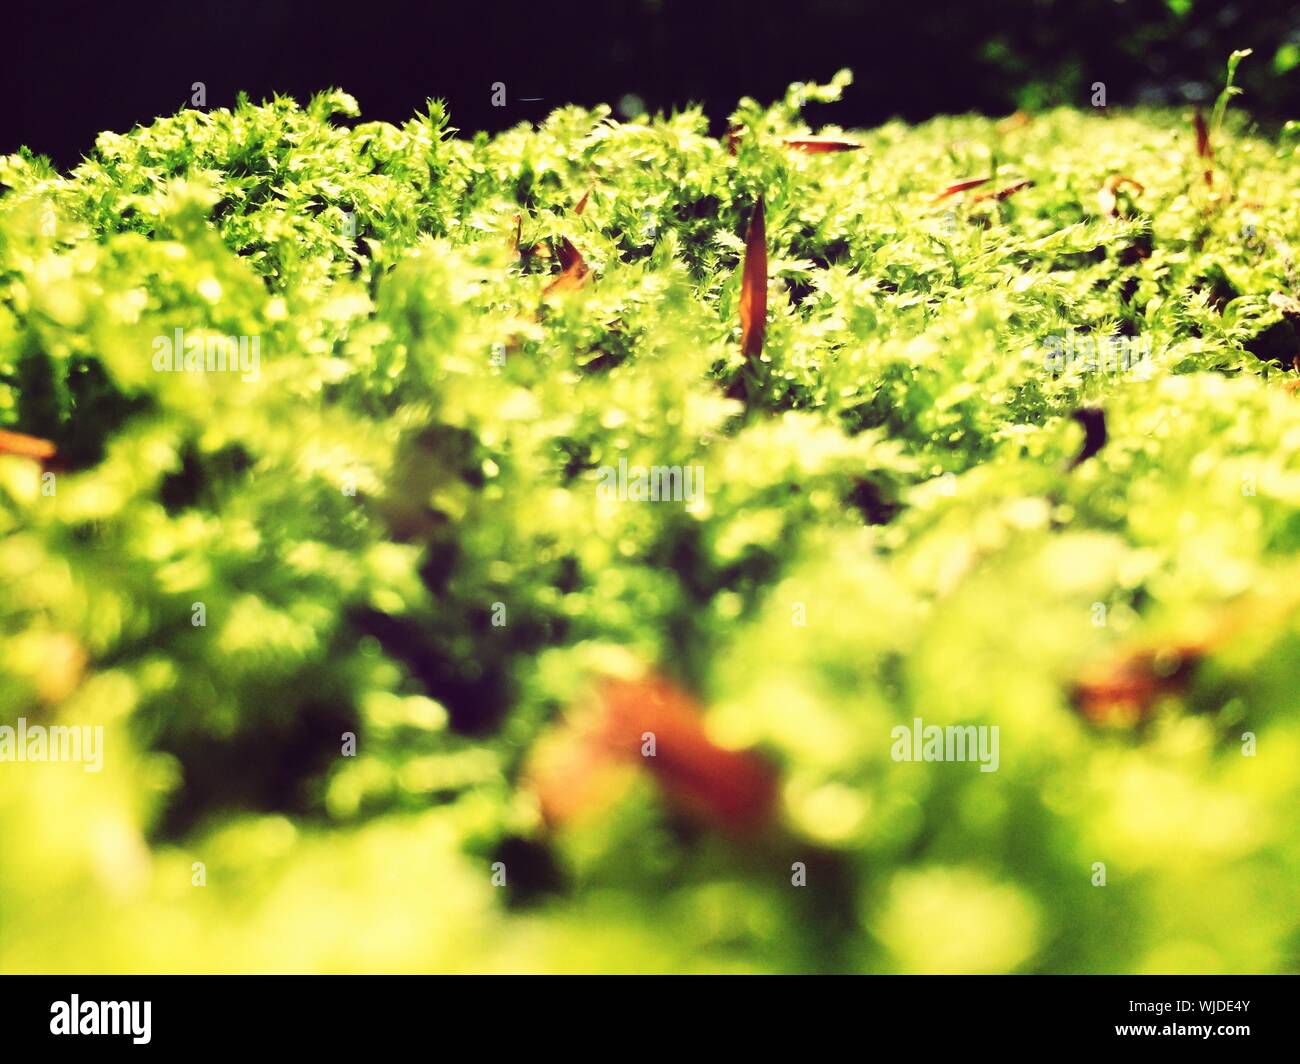 Green Plants Growing In The Warmth Of The Sun Stock Photo